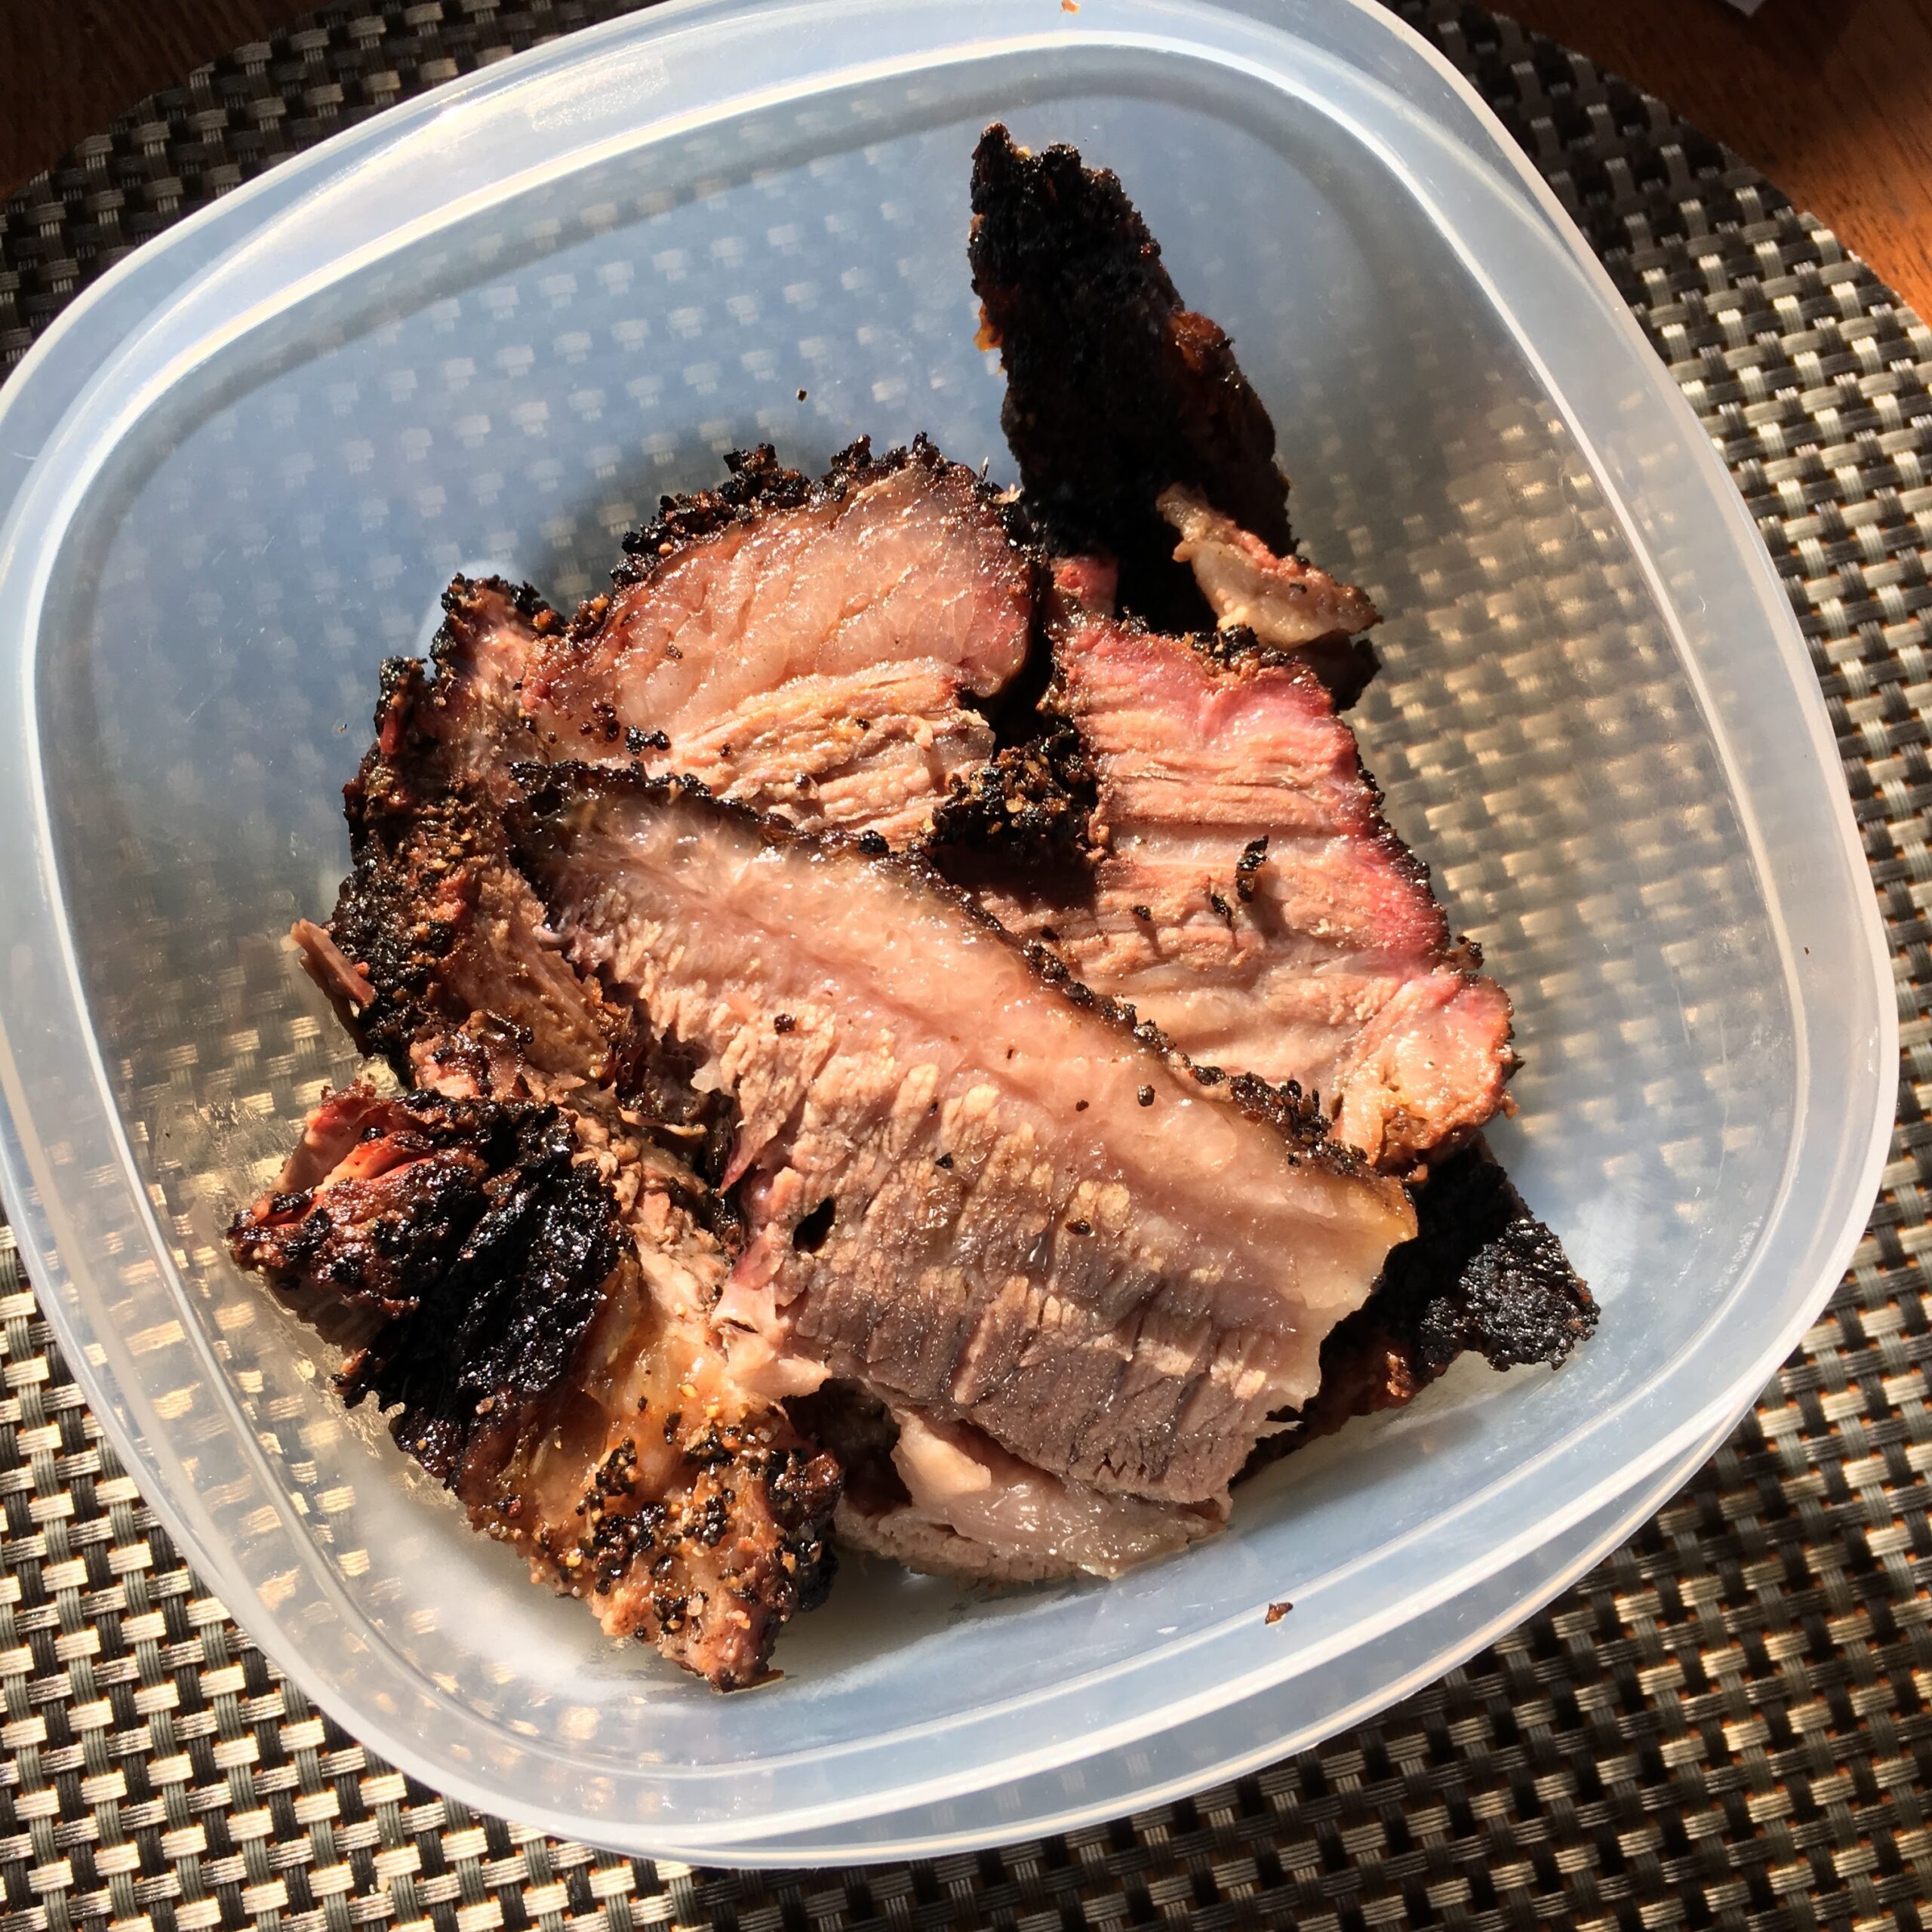 11 Things To Know About A Brisket’s Internal Temp